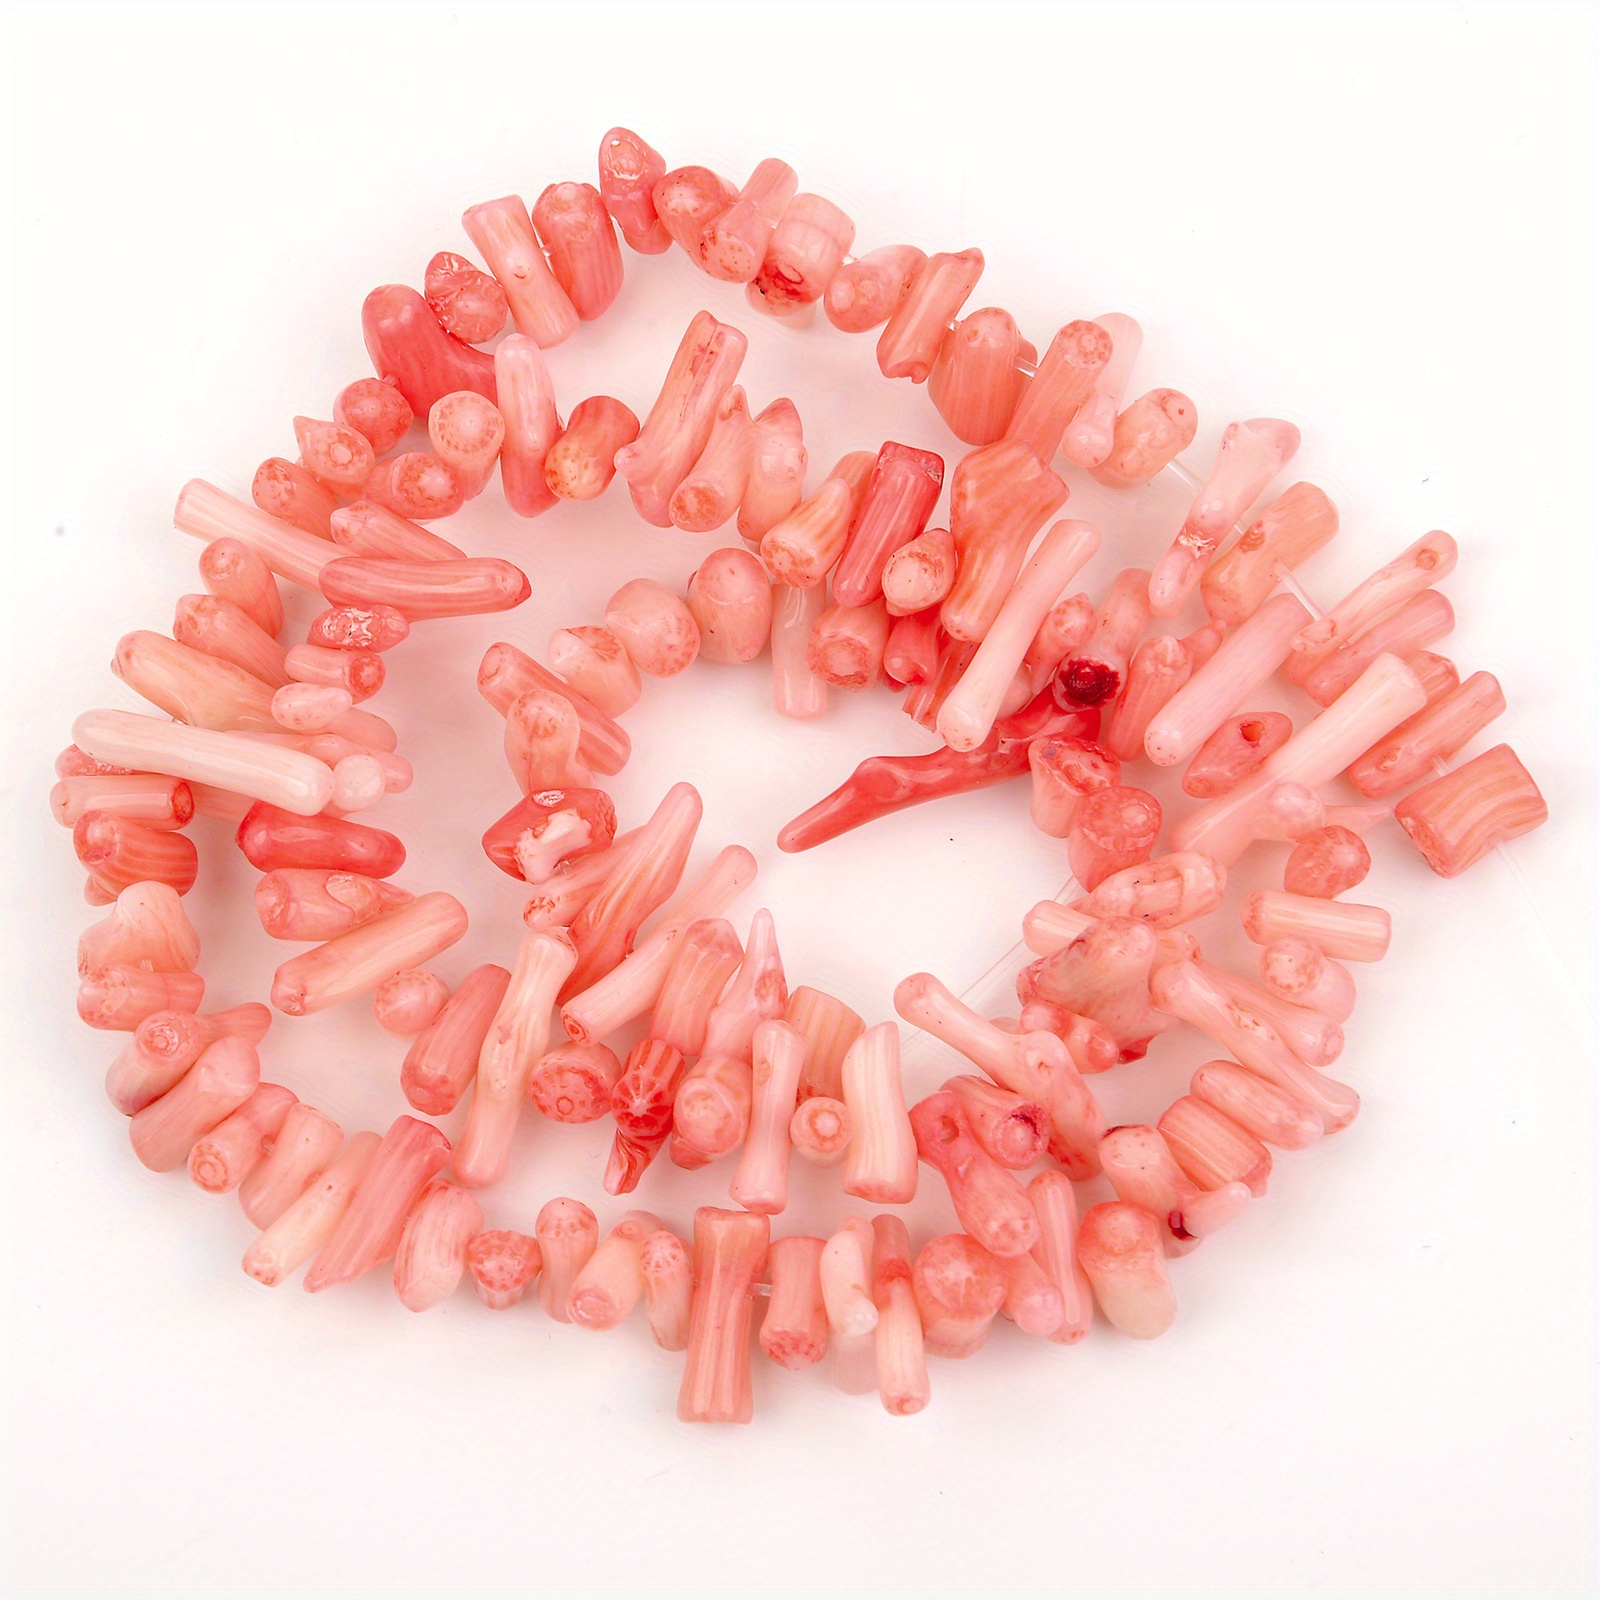 Nature's Masterpiece: High-Quality Italian Coral Necklaces